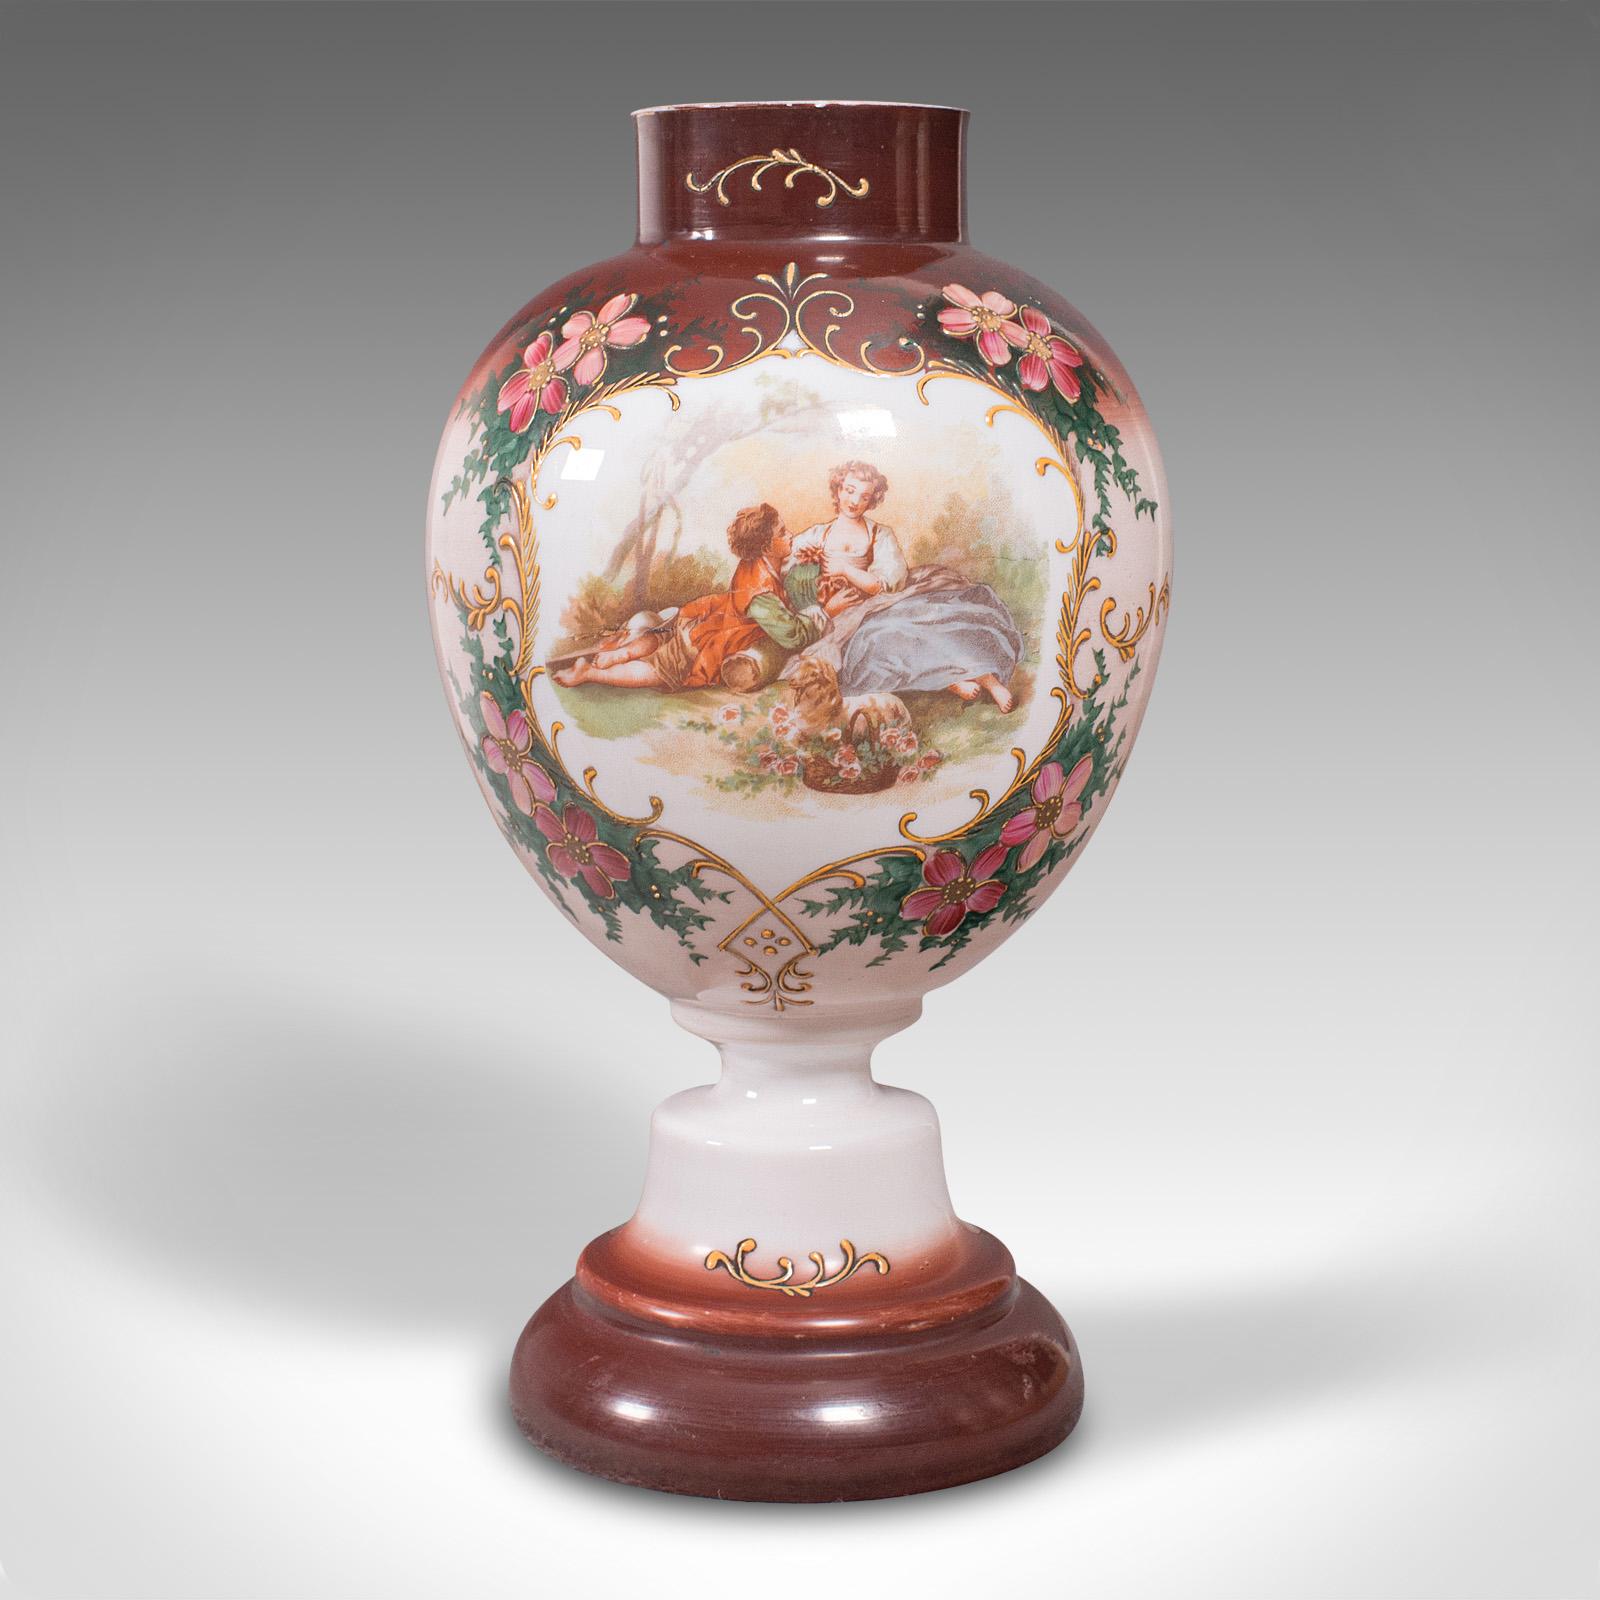 This is an antique decorative flower vase. A Continental, painted milk glass baluster urn, dating to the late Victorian period, circa 1890.

Charming aesthetic with Continental romantic taste
Displays a desirable aged patina